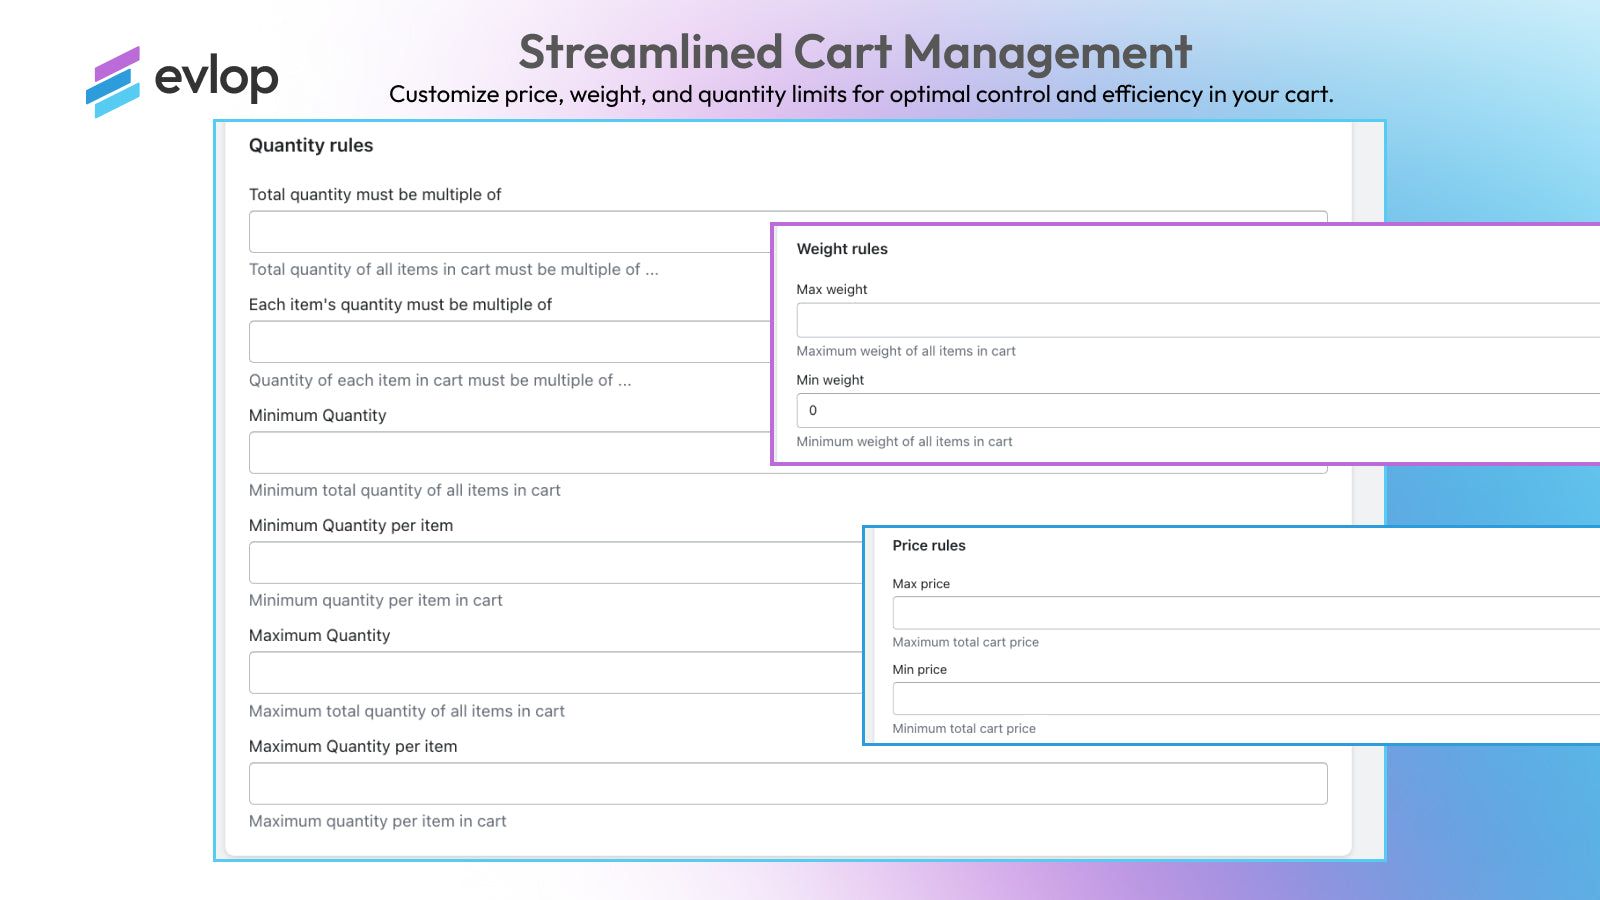 Customize cart rules for price, weight, and quantity.